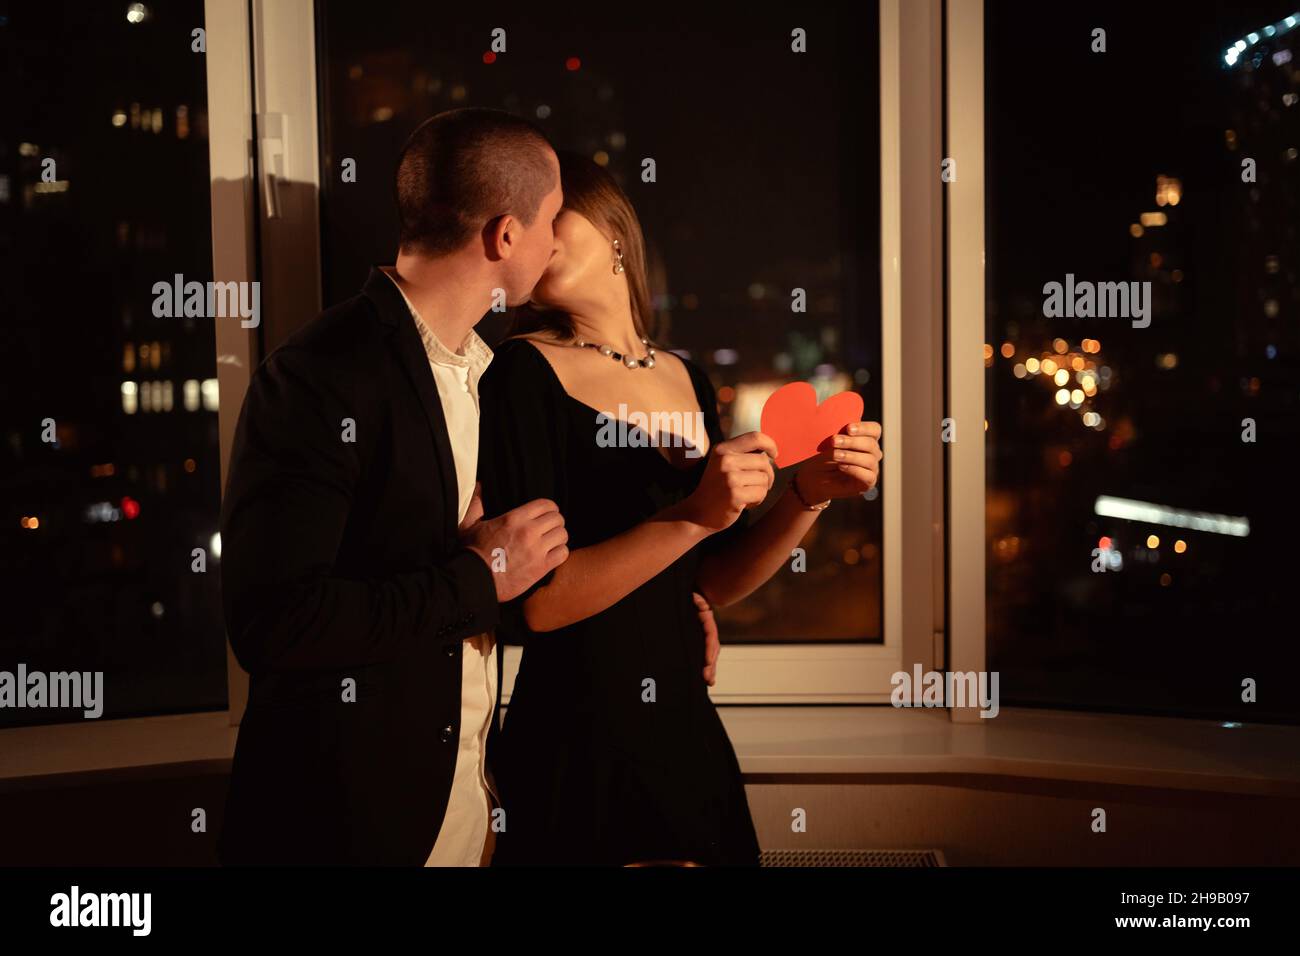 married couple kissing passionately while standing by the window in the evening, celebrating valentine's day, a man kissing a woman on a date Stock Photo